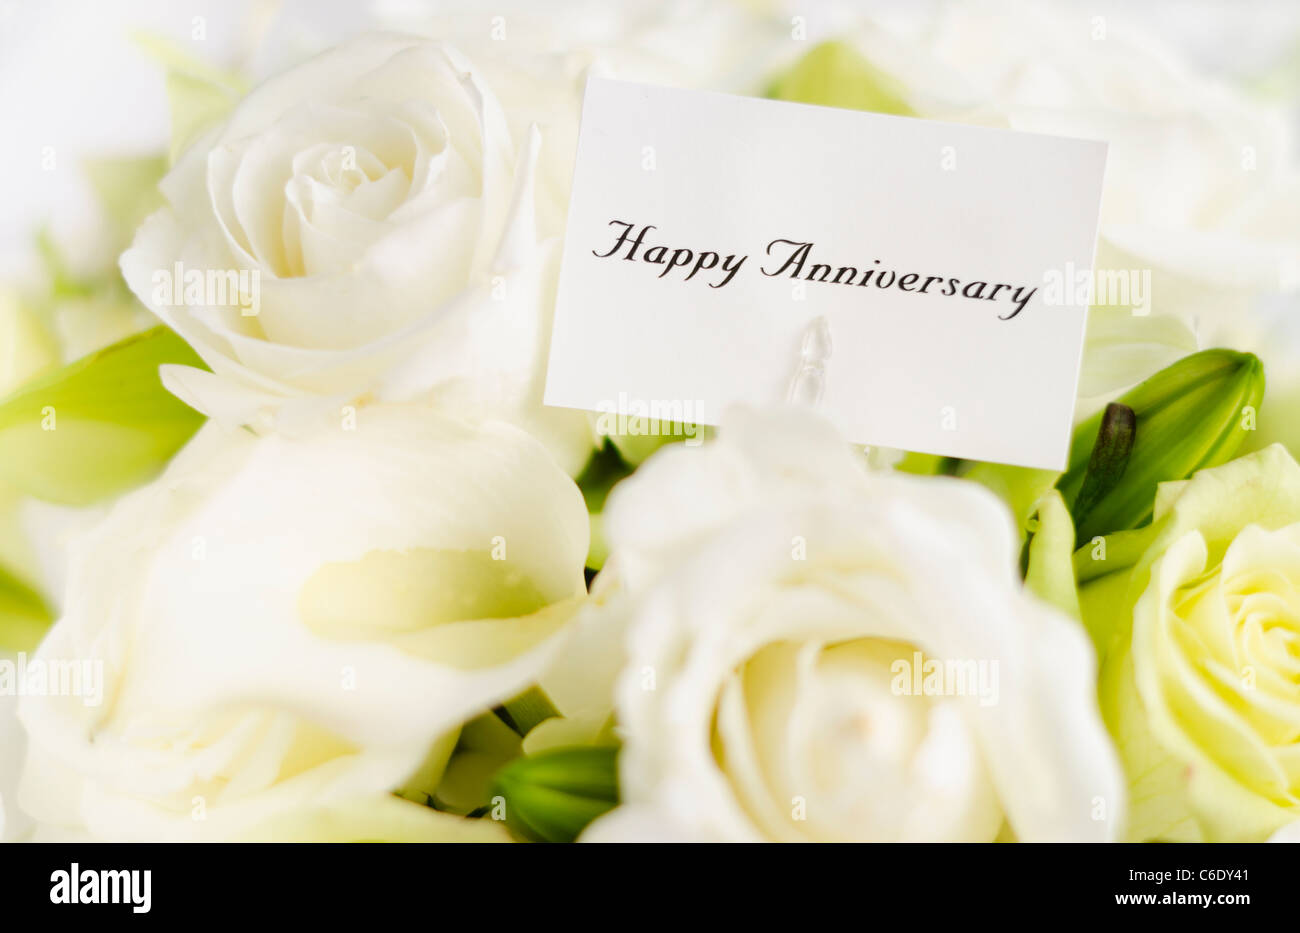  Happy  anniversary  card on bouquet of roses  Stock Photo 